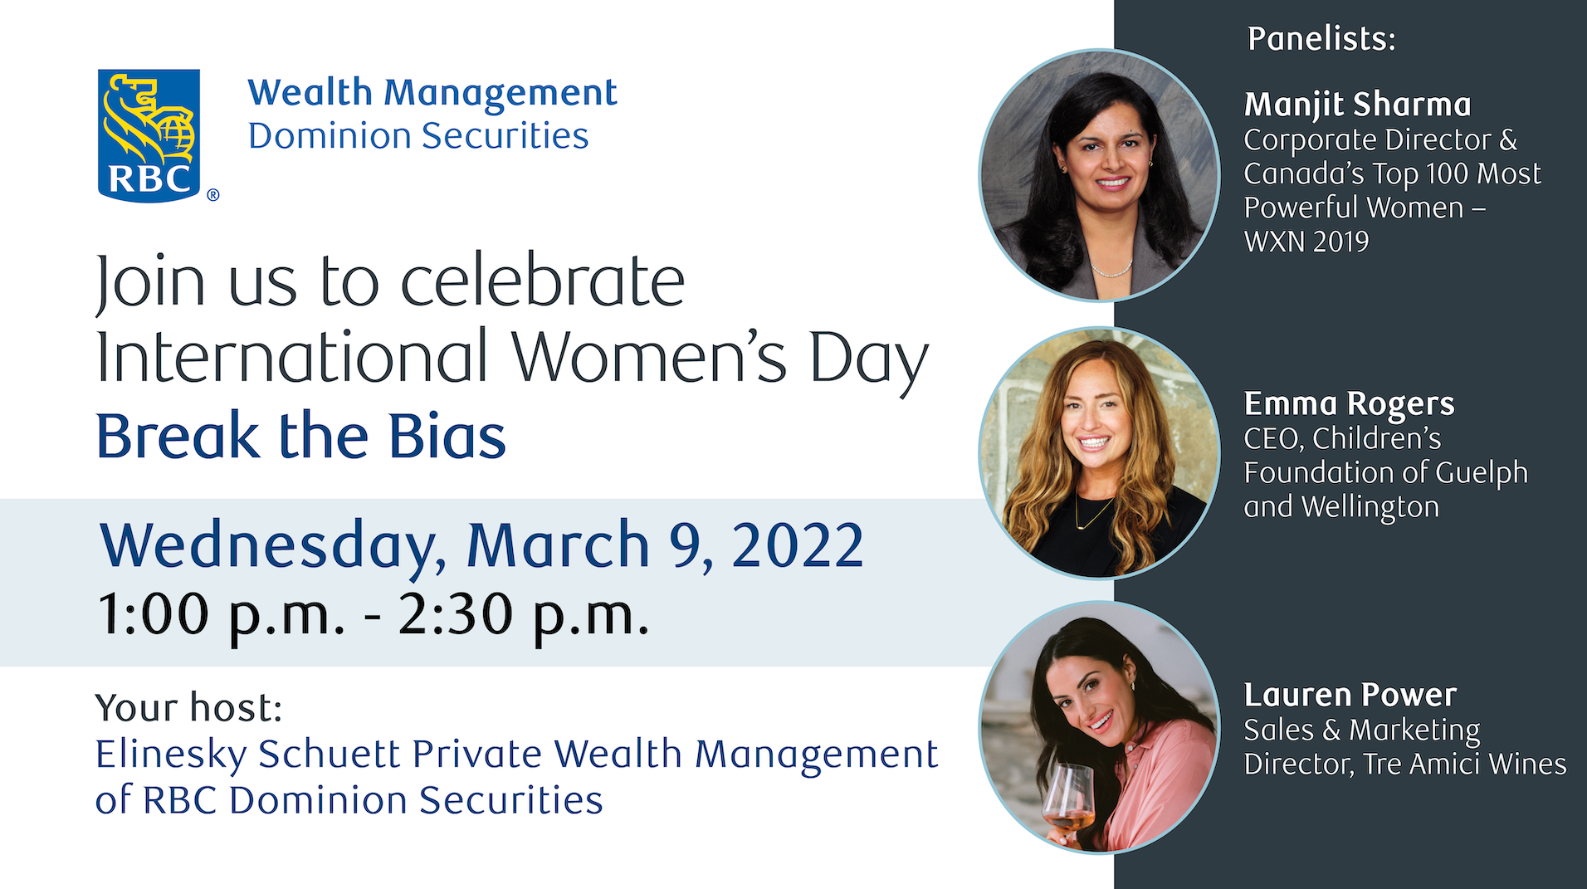 International Women's Day event promotion, including date and time information, and photos of the three panelists.